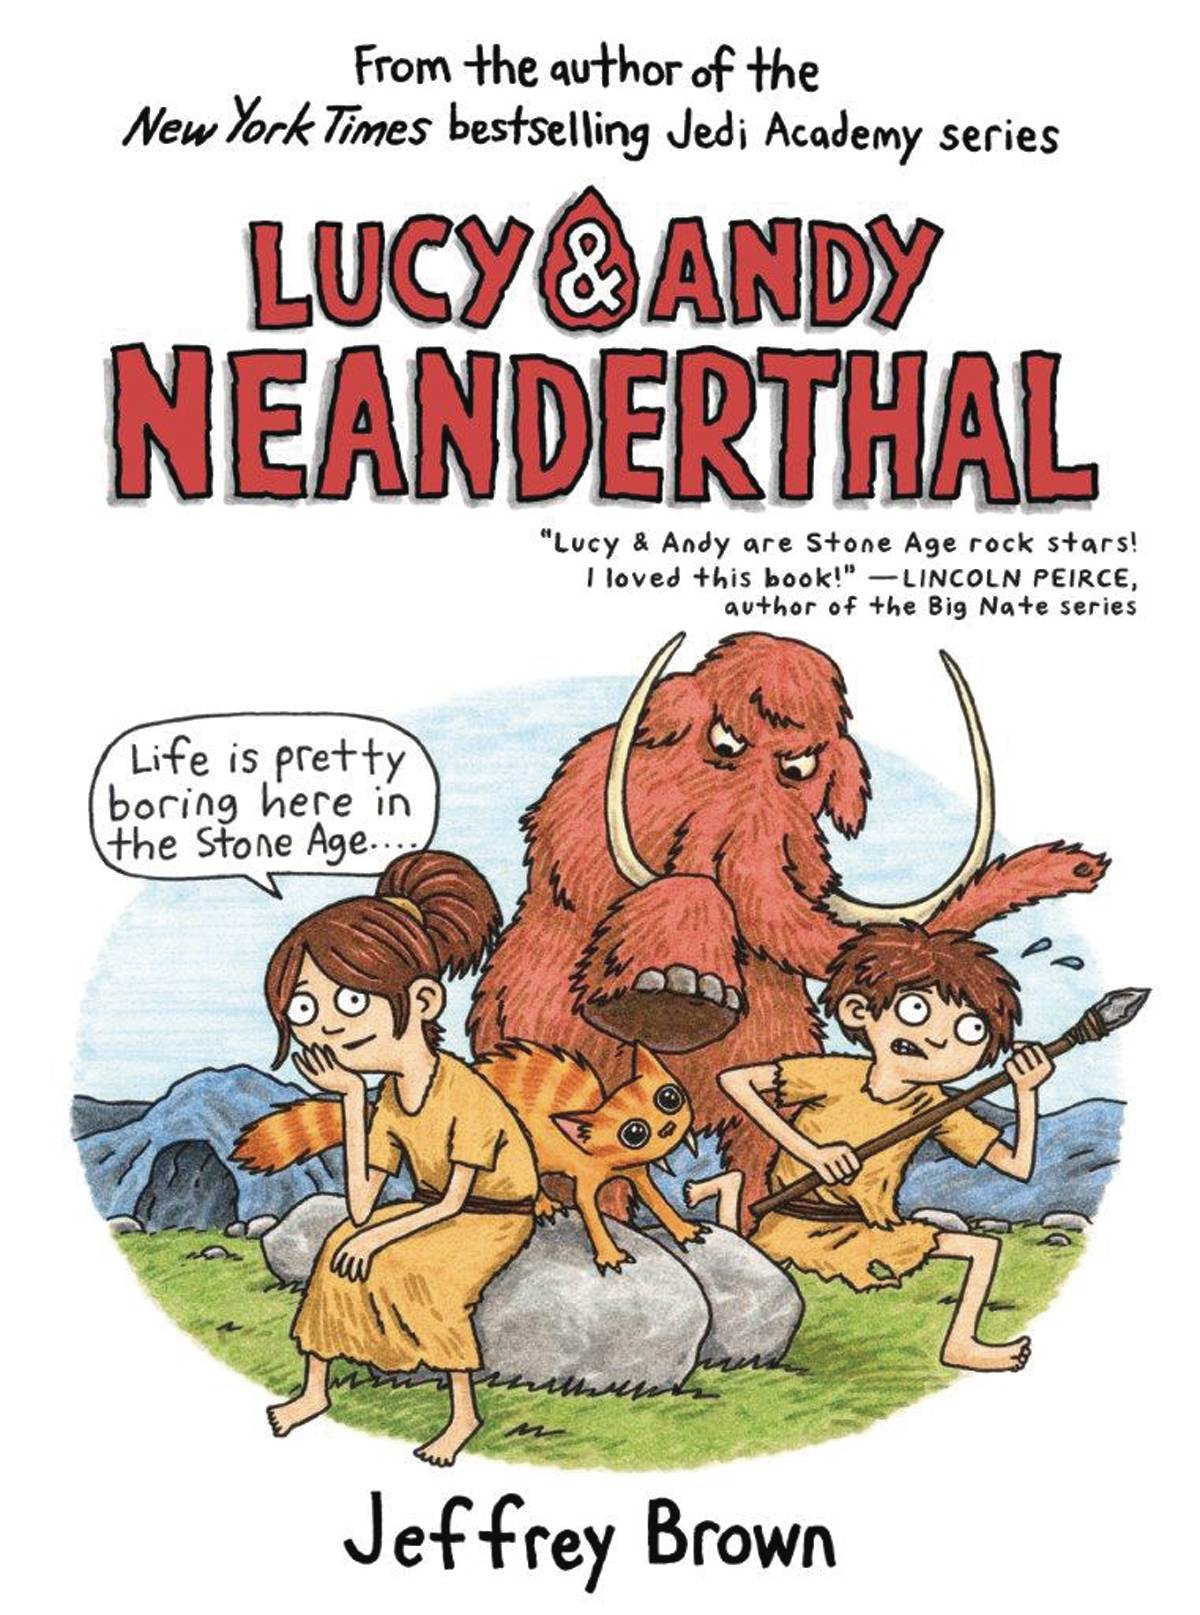 LUCY & ANDY NEANDERTHAL VOL 01 HC